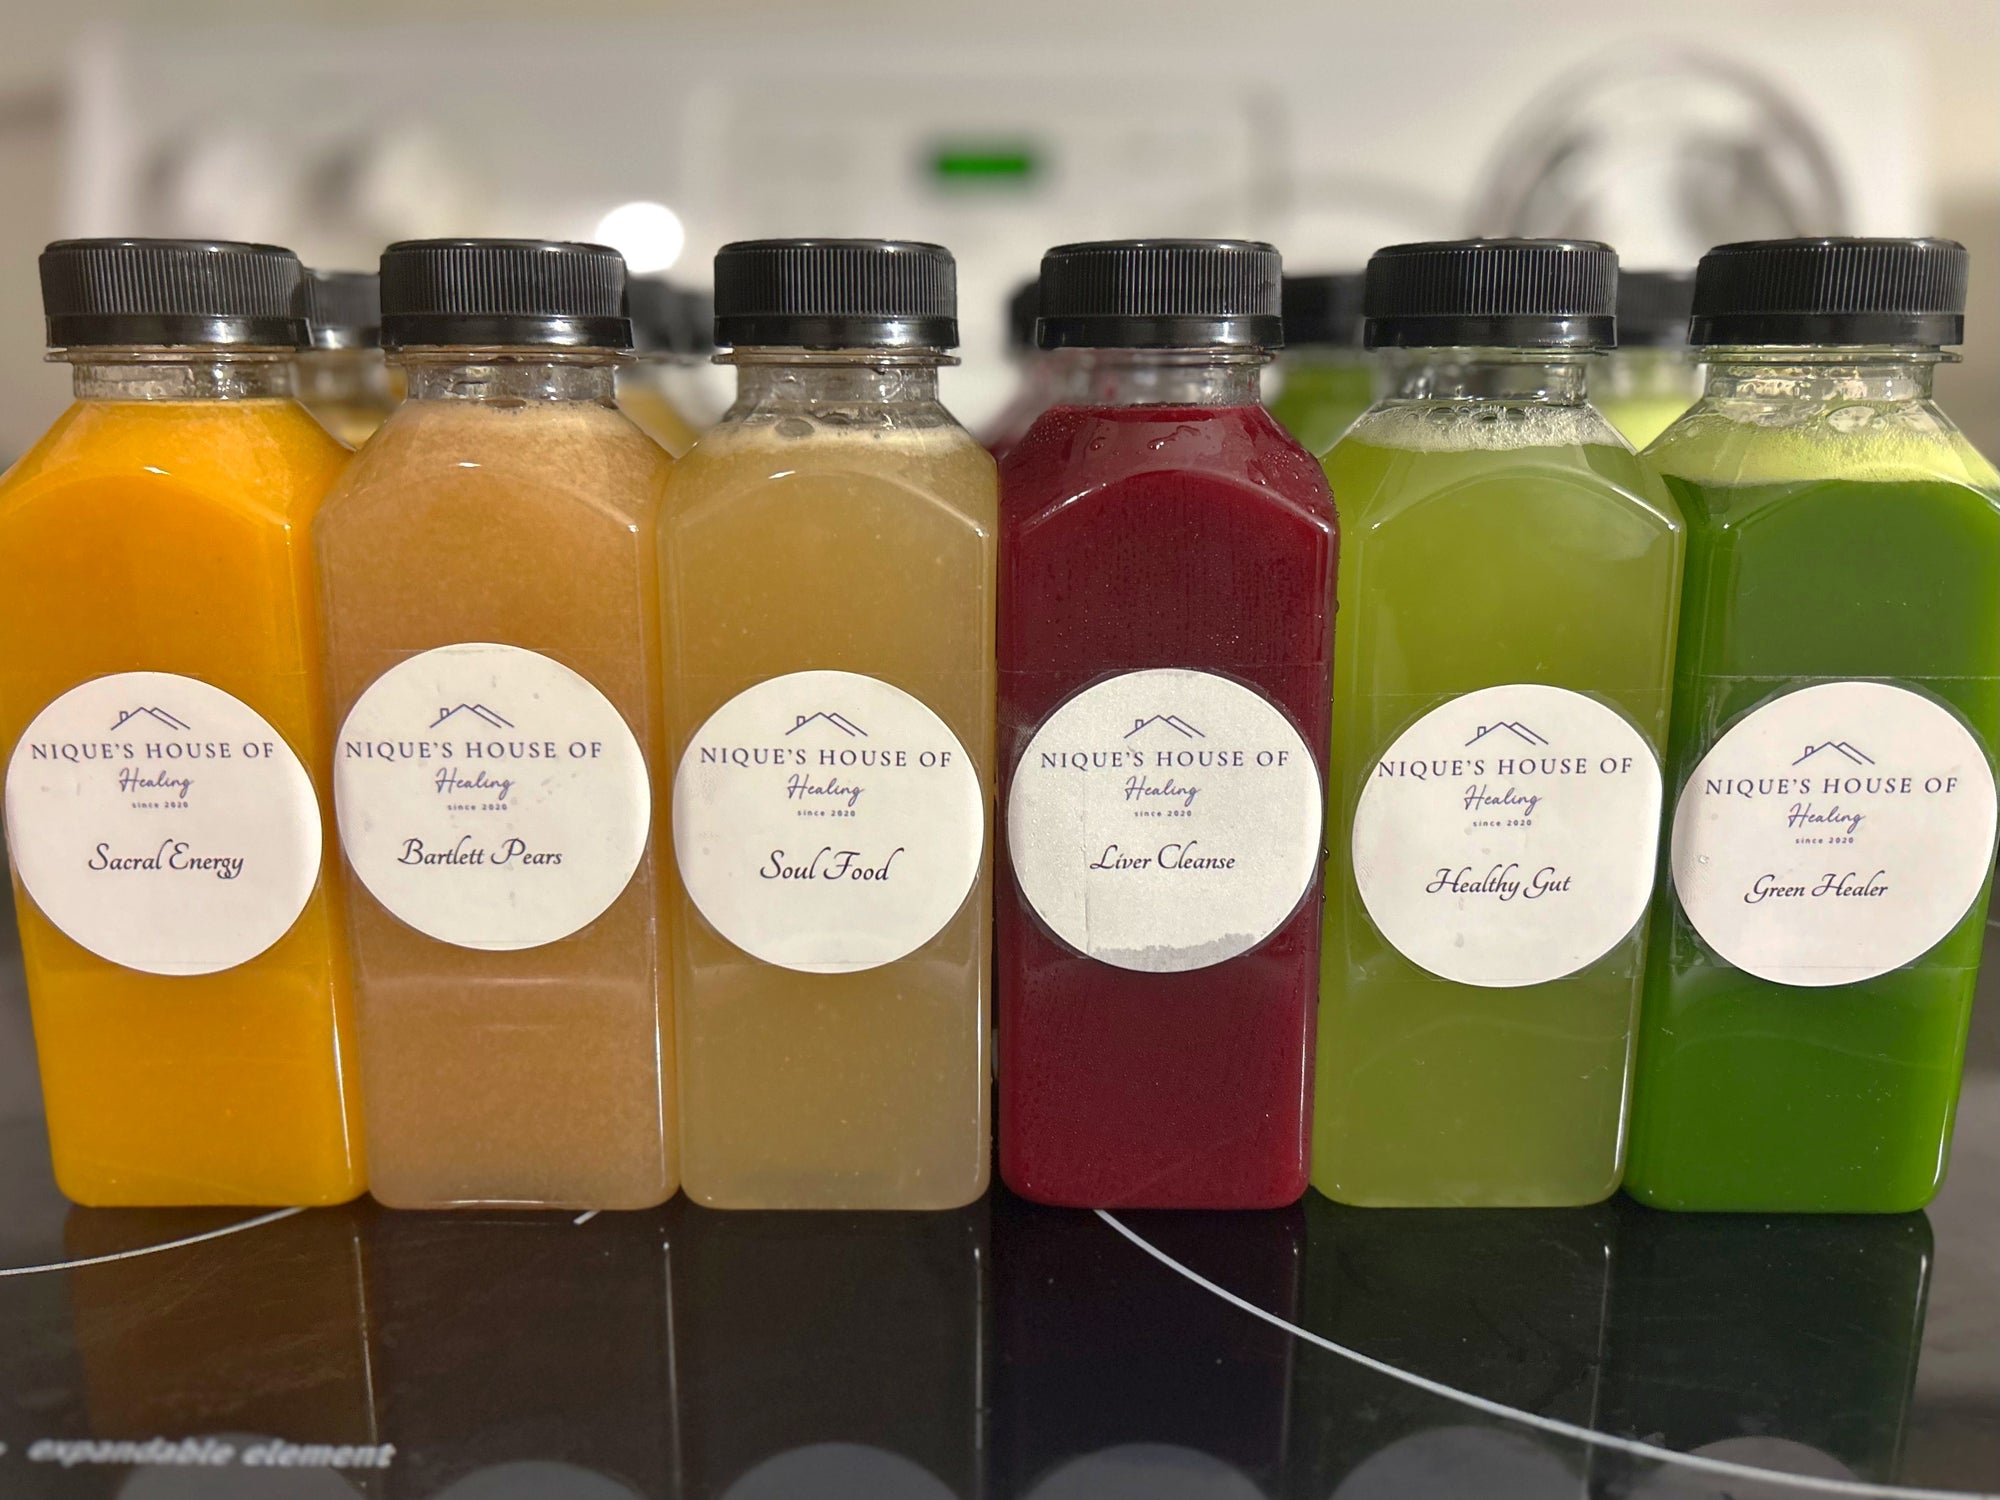 5 day juice cleanse - Nique's House of Healing